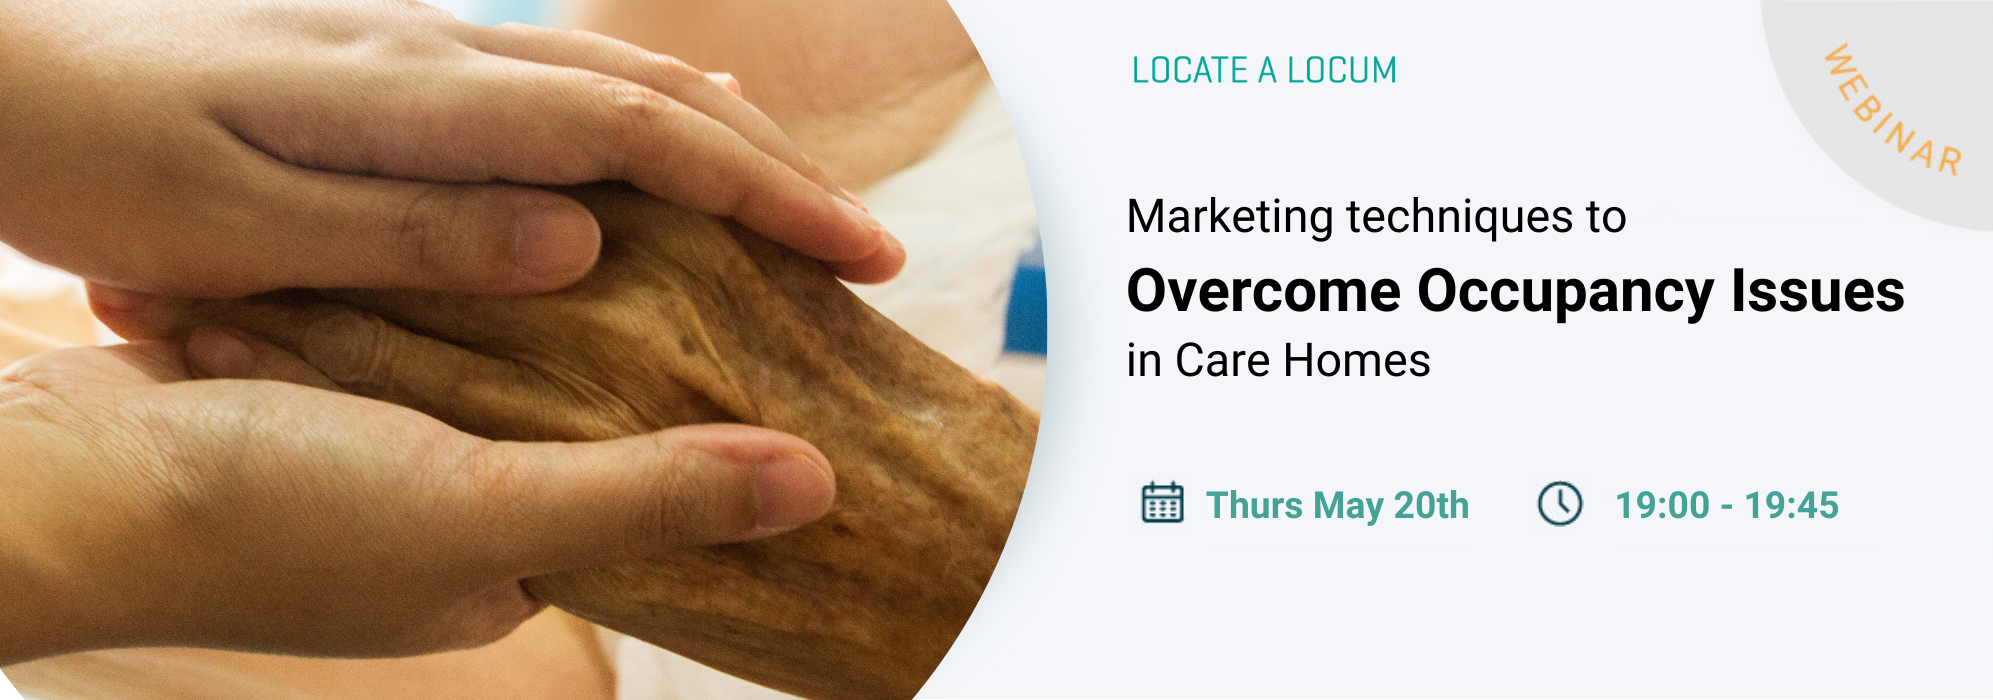 Marketing for occupancy in care homes